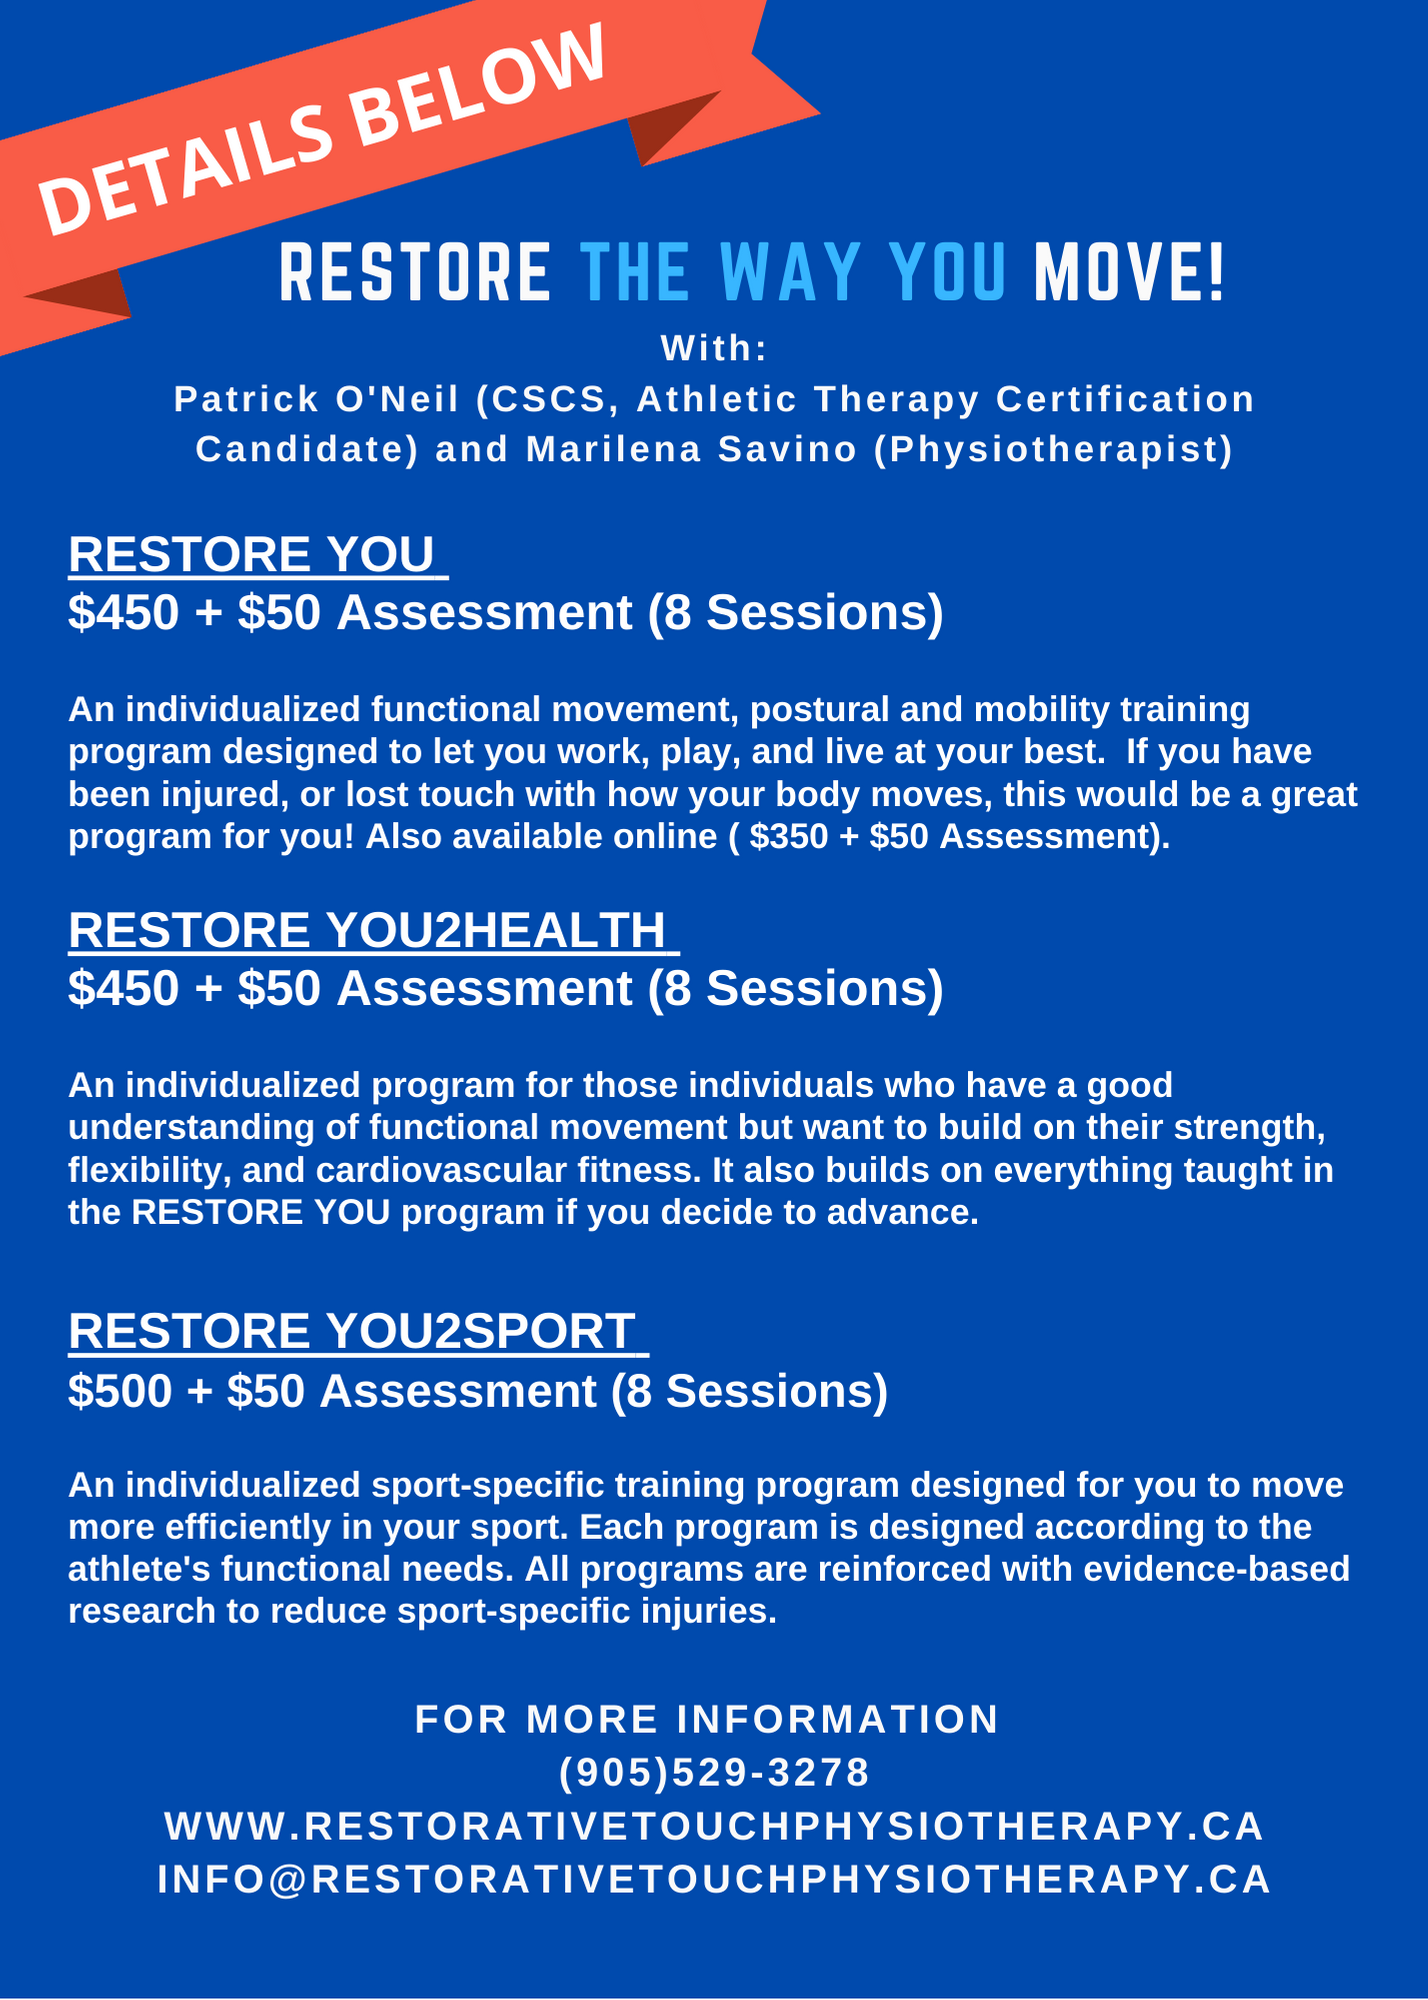 Restorative Touch Physiotherapy Hamilton Mountain Details below. Restore the way you move! With: Patrick O'Neil (CSCS, Athletic Therapy Certification Candidate) and Marilena Savino (Physiotherapist). RESTORE YOU $450 + $50 Assessment (8 Sessions). An individualized functional movement, postural and mobility training program designed to let you work, play, and live at your best. If you have been injured, or lost touch with how your body moves, this would be a great program for you! Also available online ($350 + $50 Assessment). Restore You 2 Health $450 + $50 Assessment (8 Sessions). An individualized program for those individuals who have a good understanding of functional movement but want to build on their strength, flexibility, and cardiovascular fitness. It also builds on everything taught in the RESTORE YOU program if you decide to advance. Restore You 2 Sport $500 + $50 Assessment (8 Sessions) Individualized sport-specific training program designed for you to move more efficiently in your sport. Each program is designed according to the athlete's functional needs. All programs are reinforced with evidence-based research to reduce sport-specific injuries. For more information (905)529-3278 www.restorativetouchphysiotherapy.ca info@restorativetouchphysiotherapy.ca